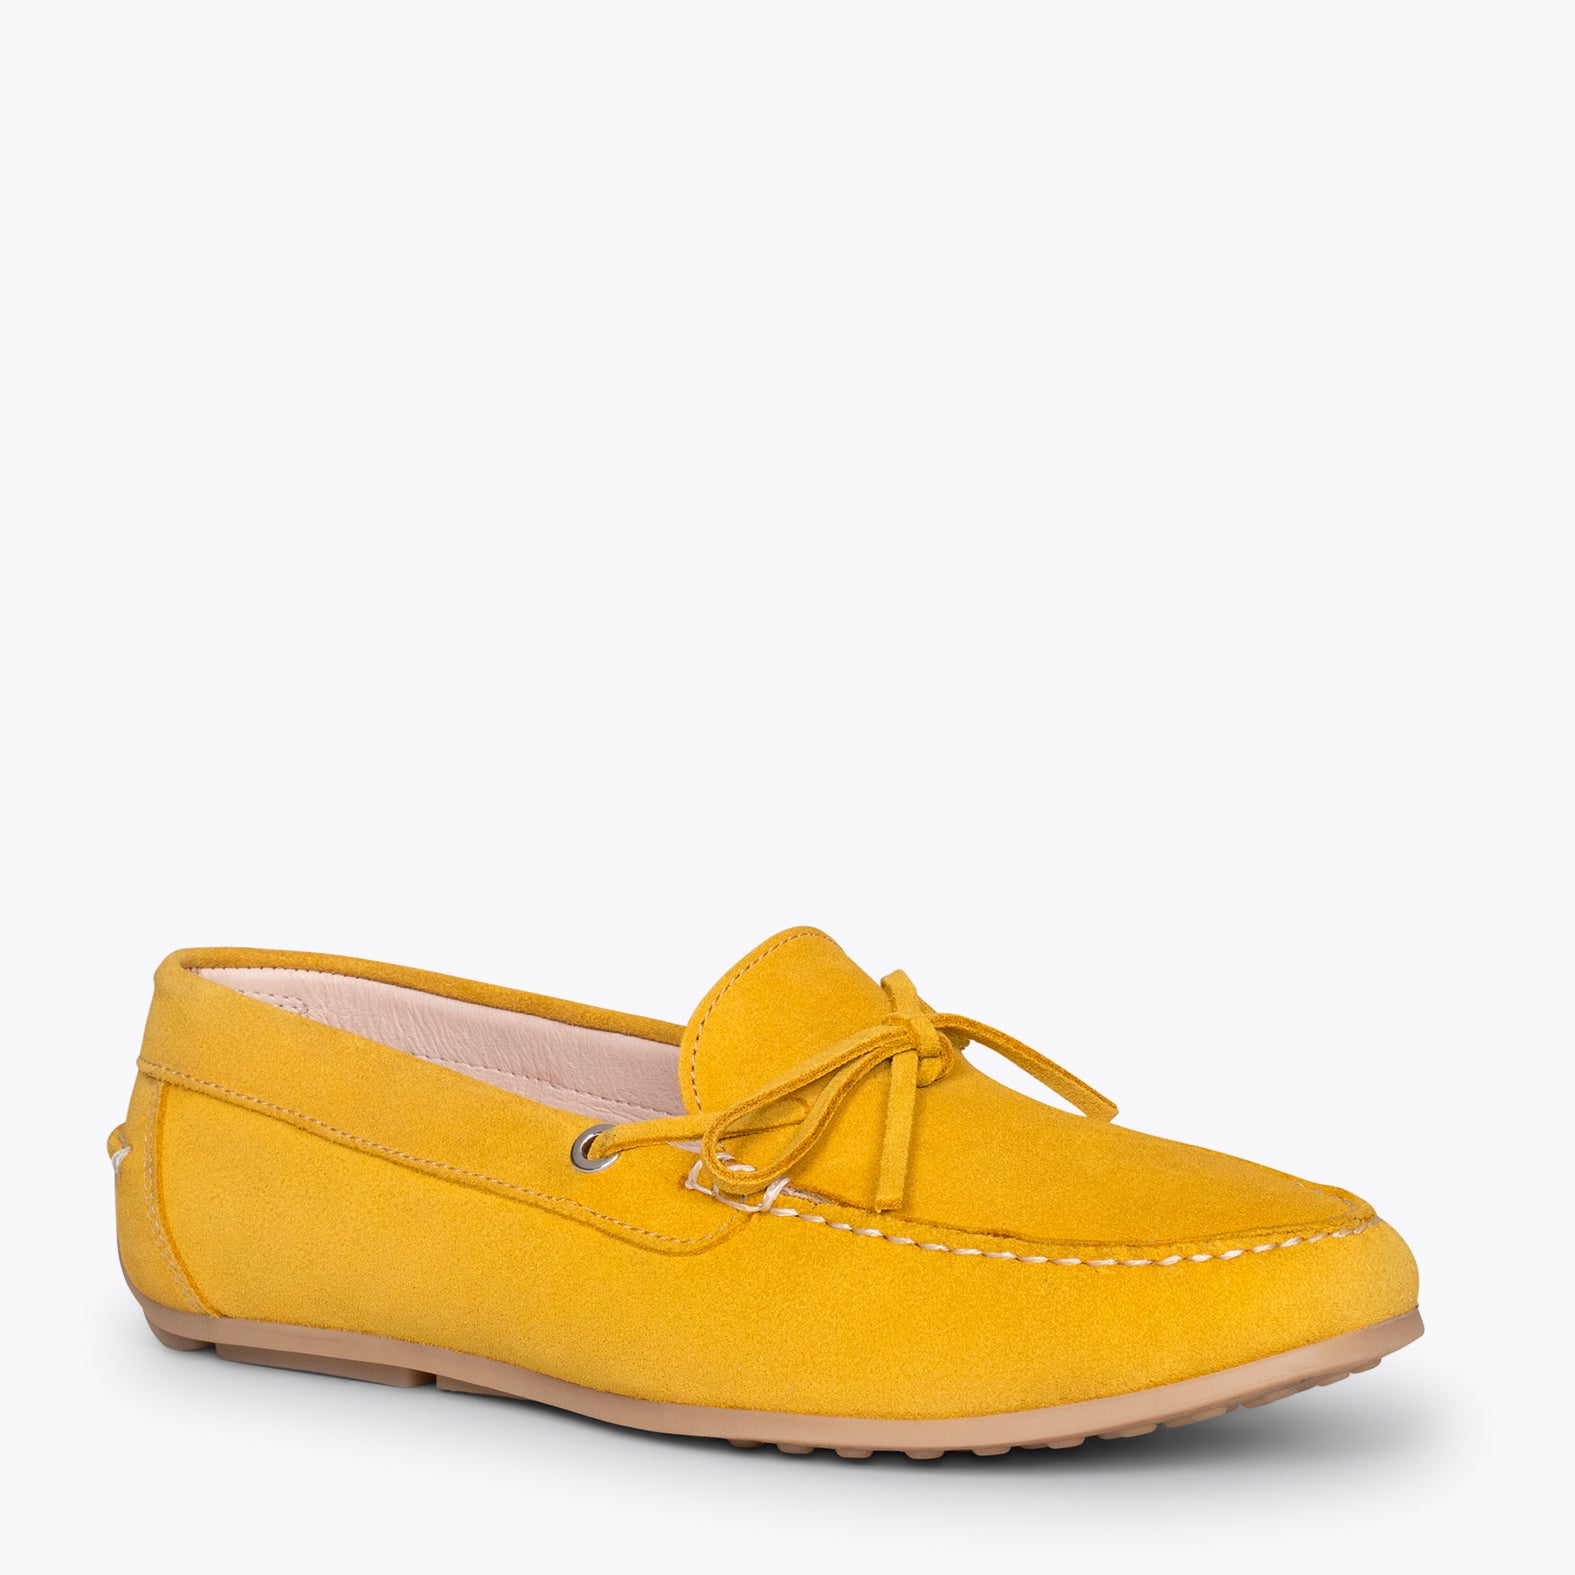 LACE – YELLOW moccasins with removable insole